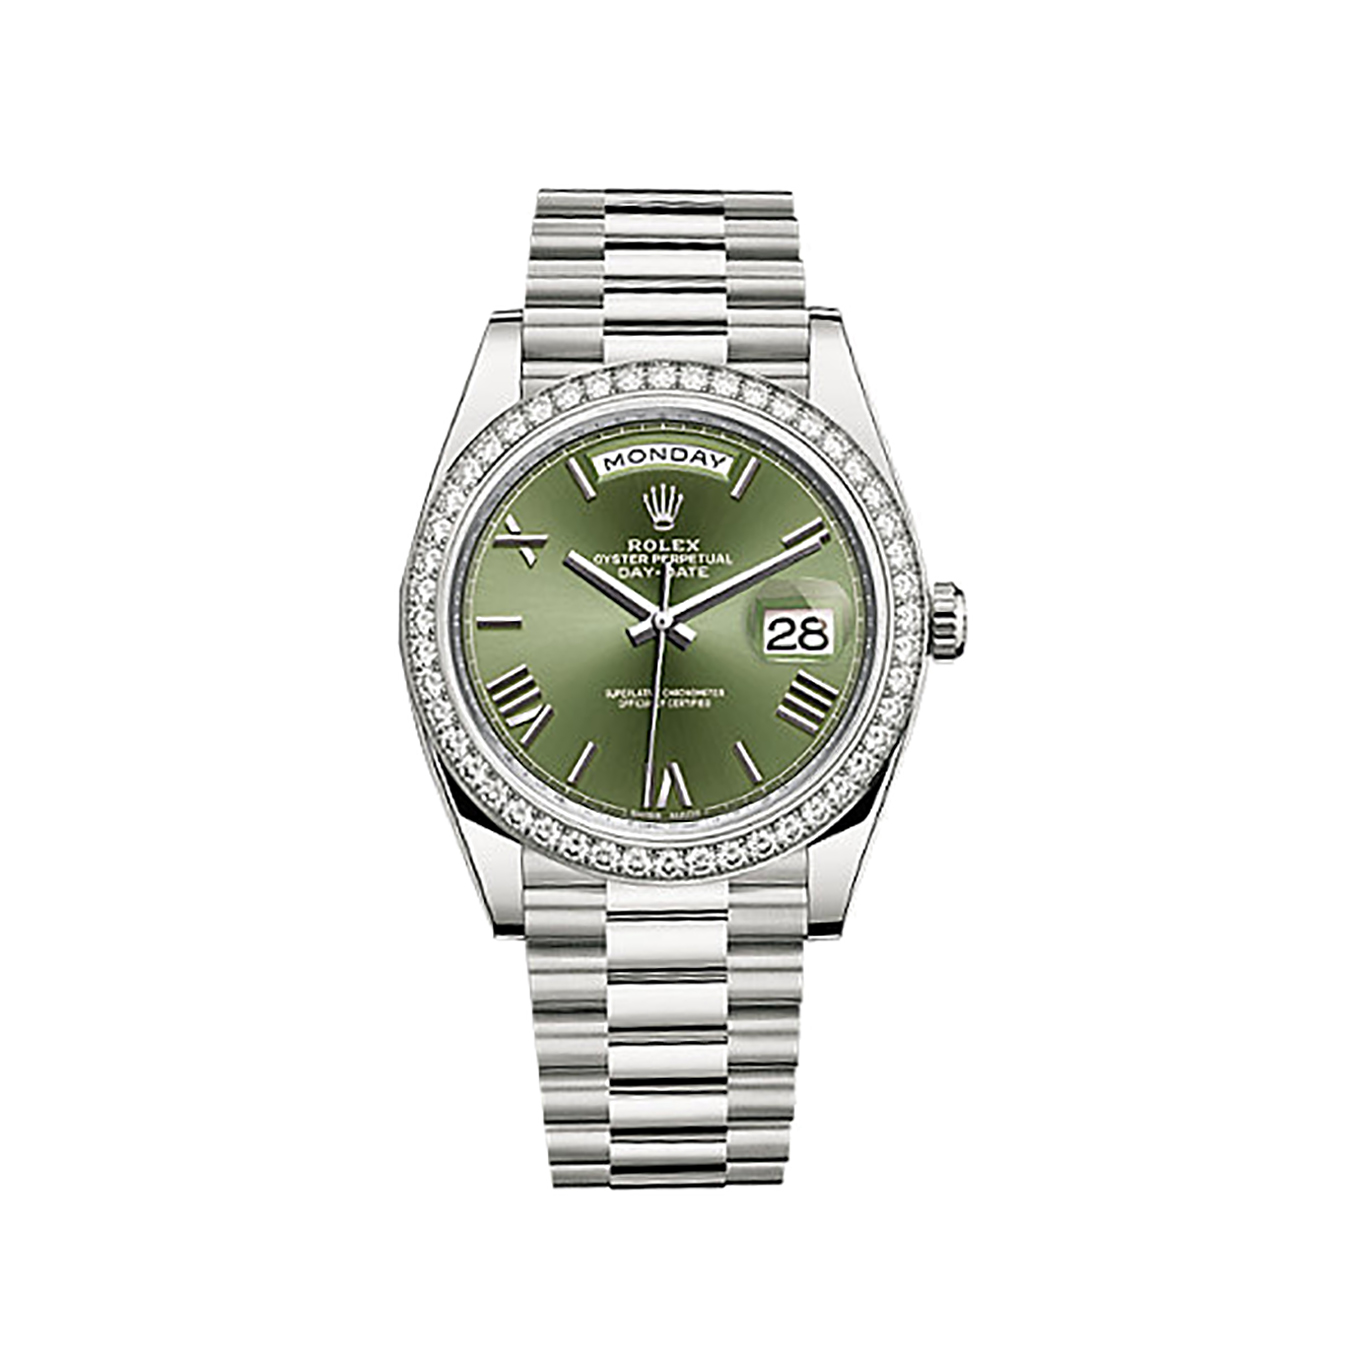 Day-Date 40 228349RBR White Gold & Diamonds Watch (Olive Green)